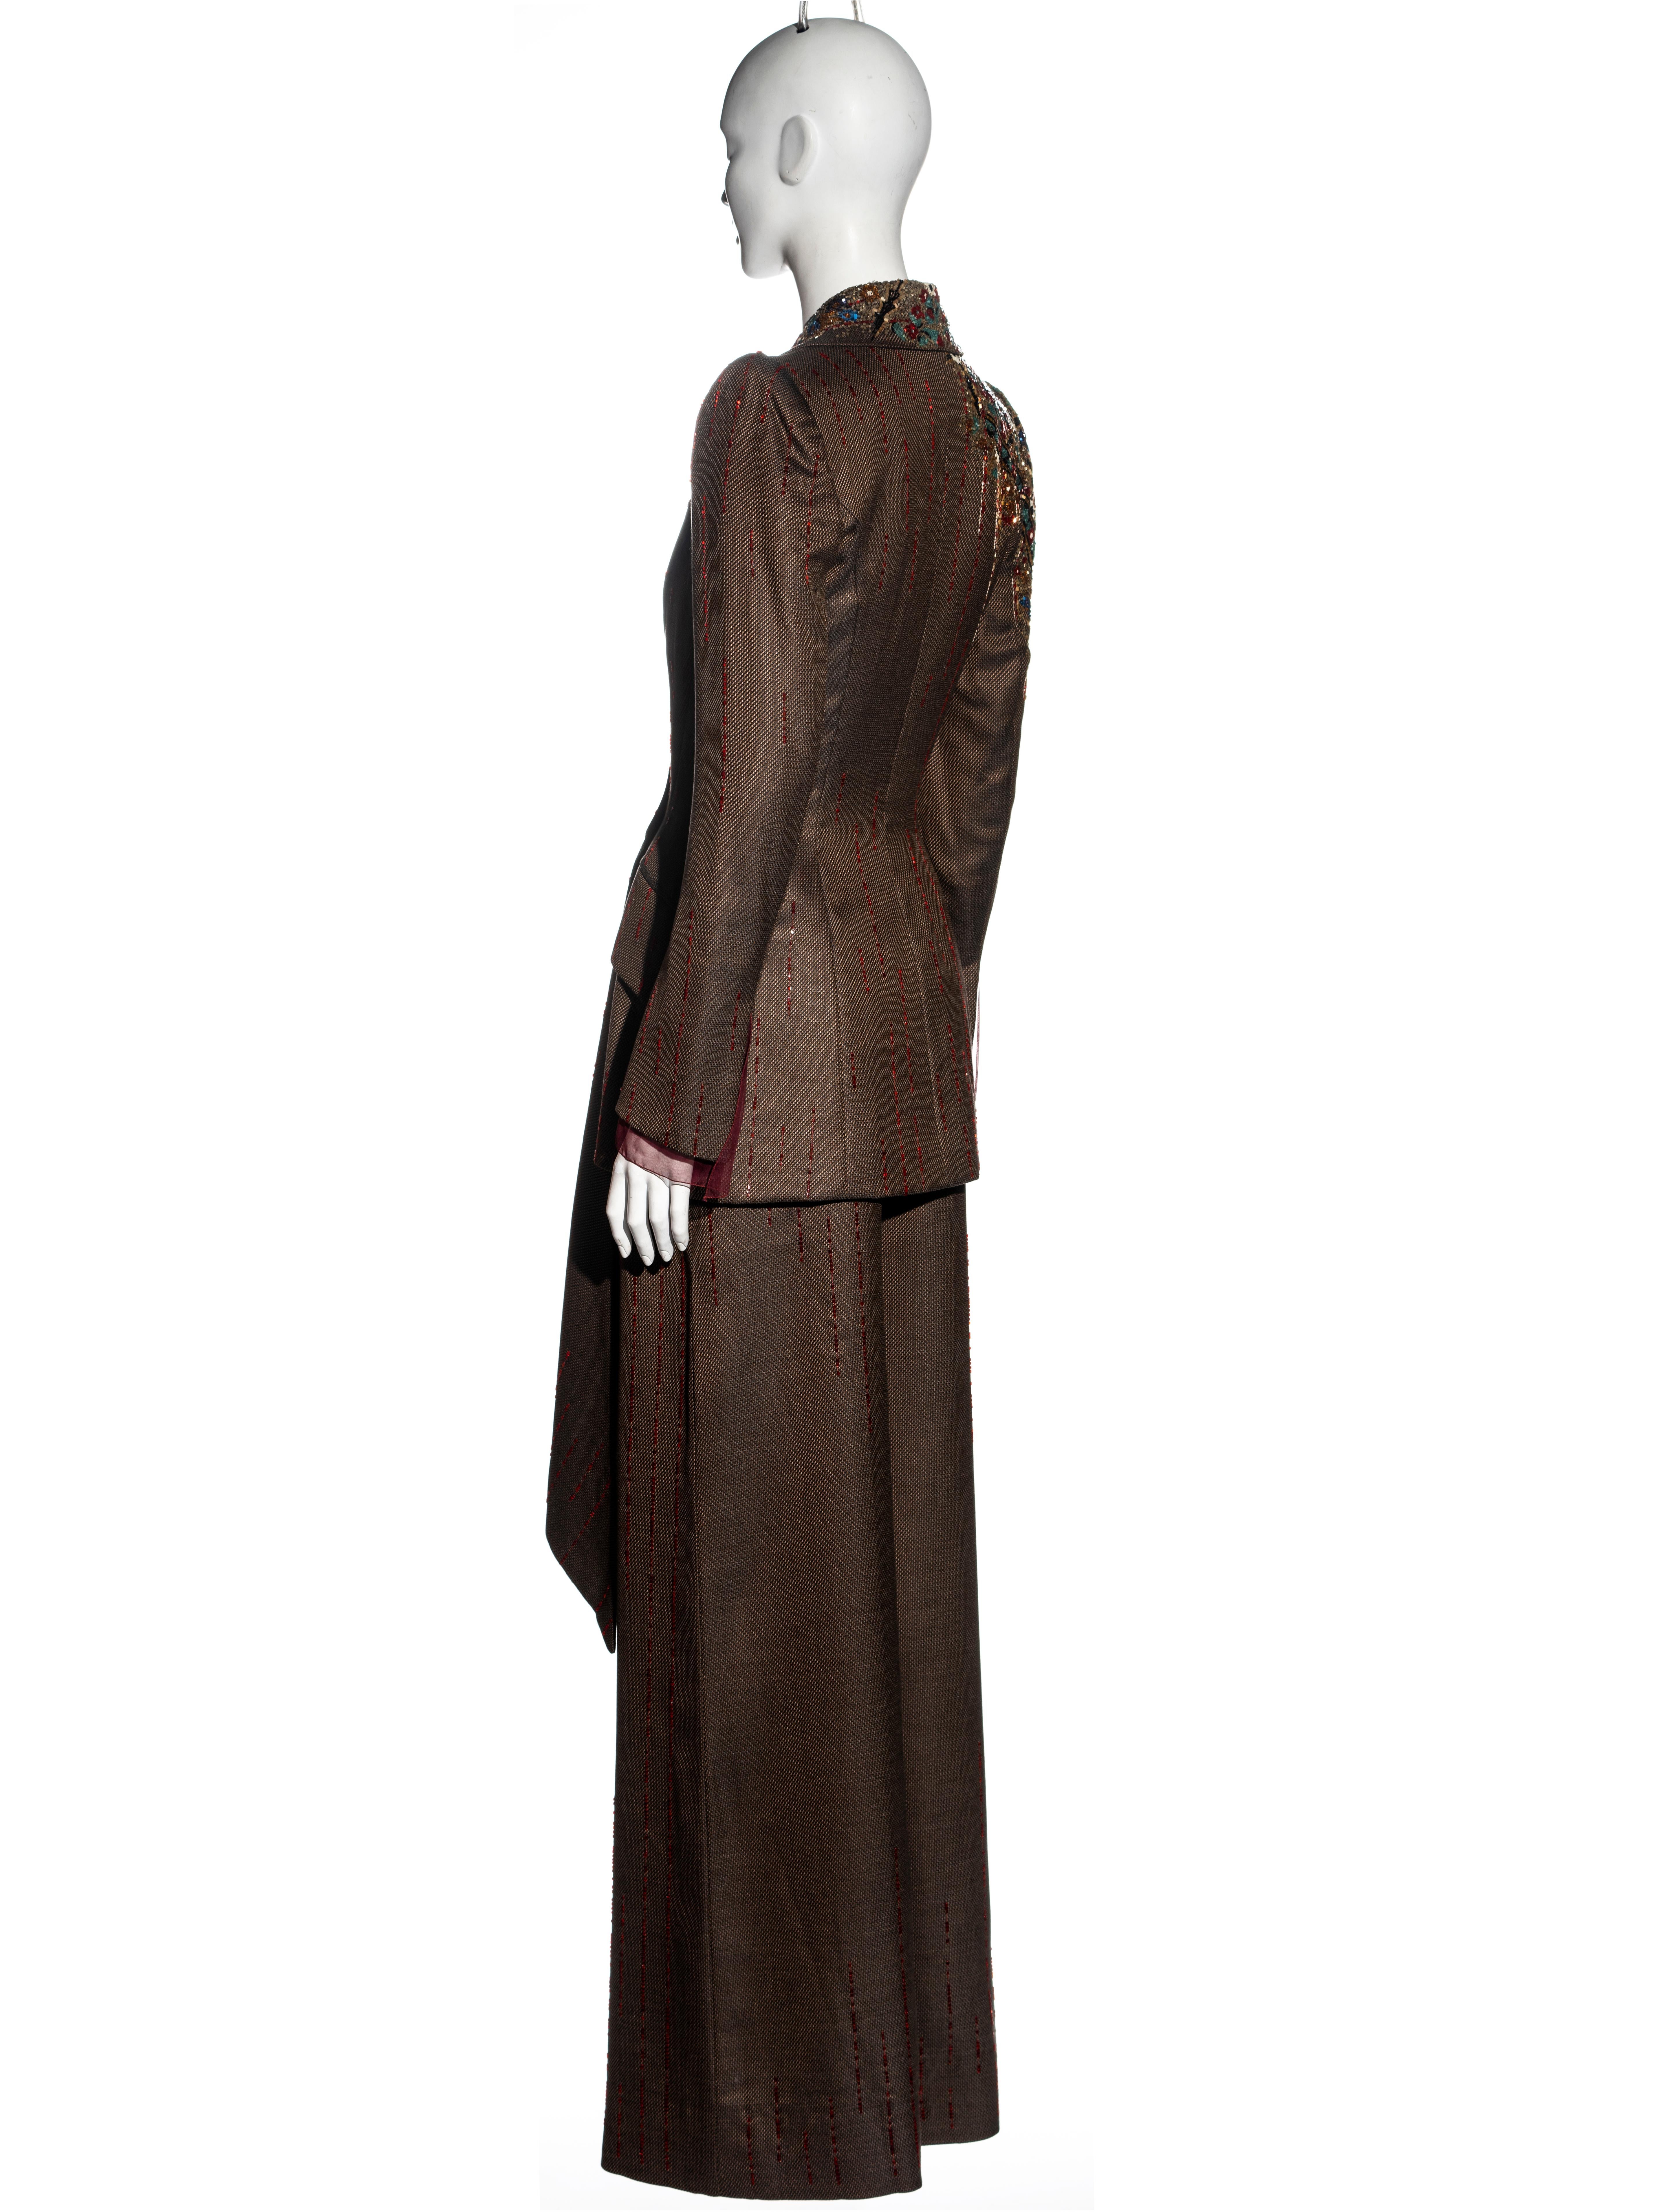 Jean-Louis Scherrer Haute Couture embellished brown wool pant suit, fw 2001 For Sale 3